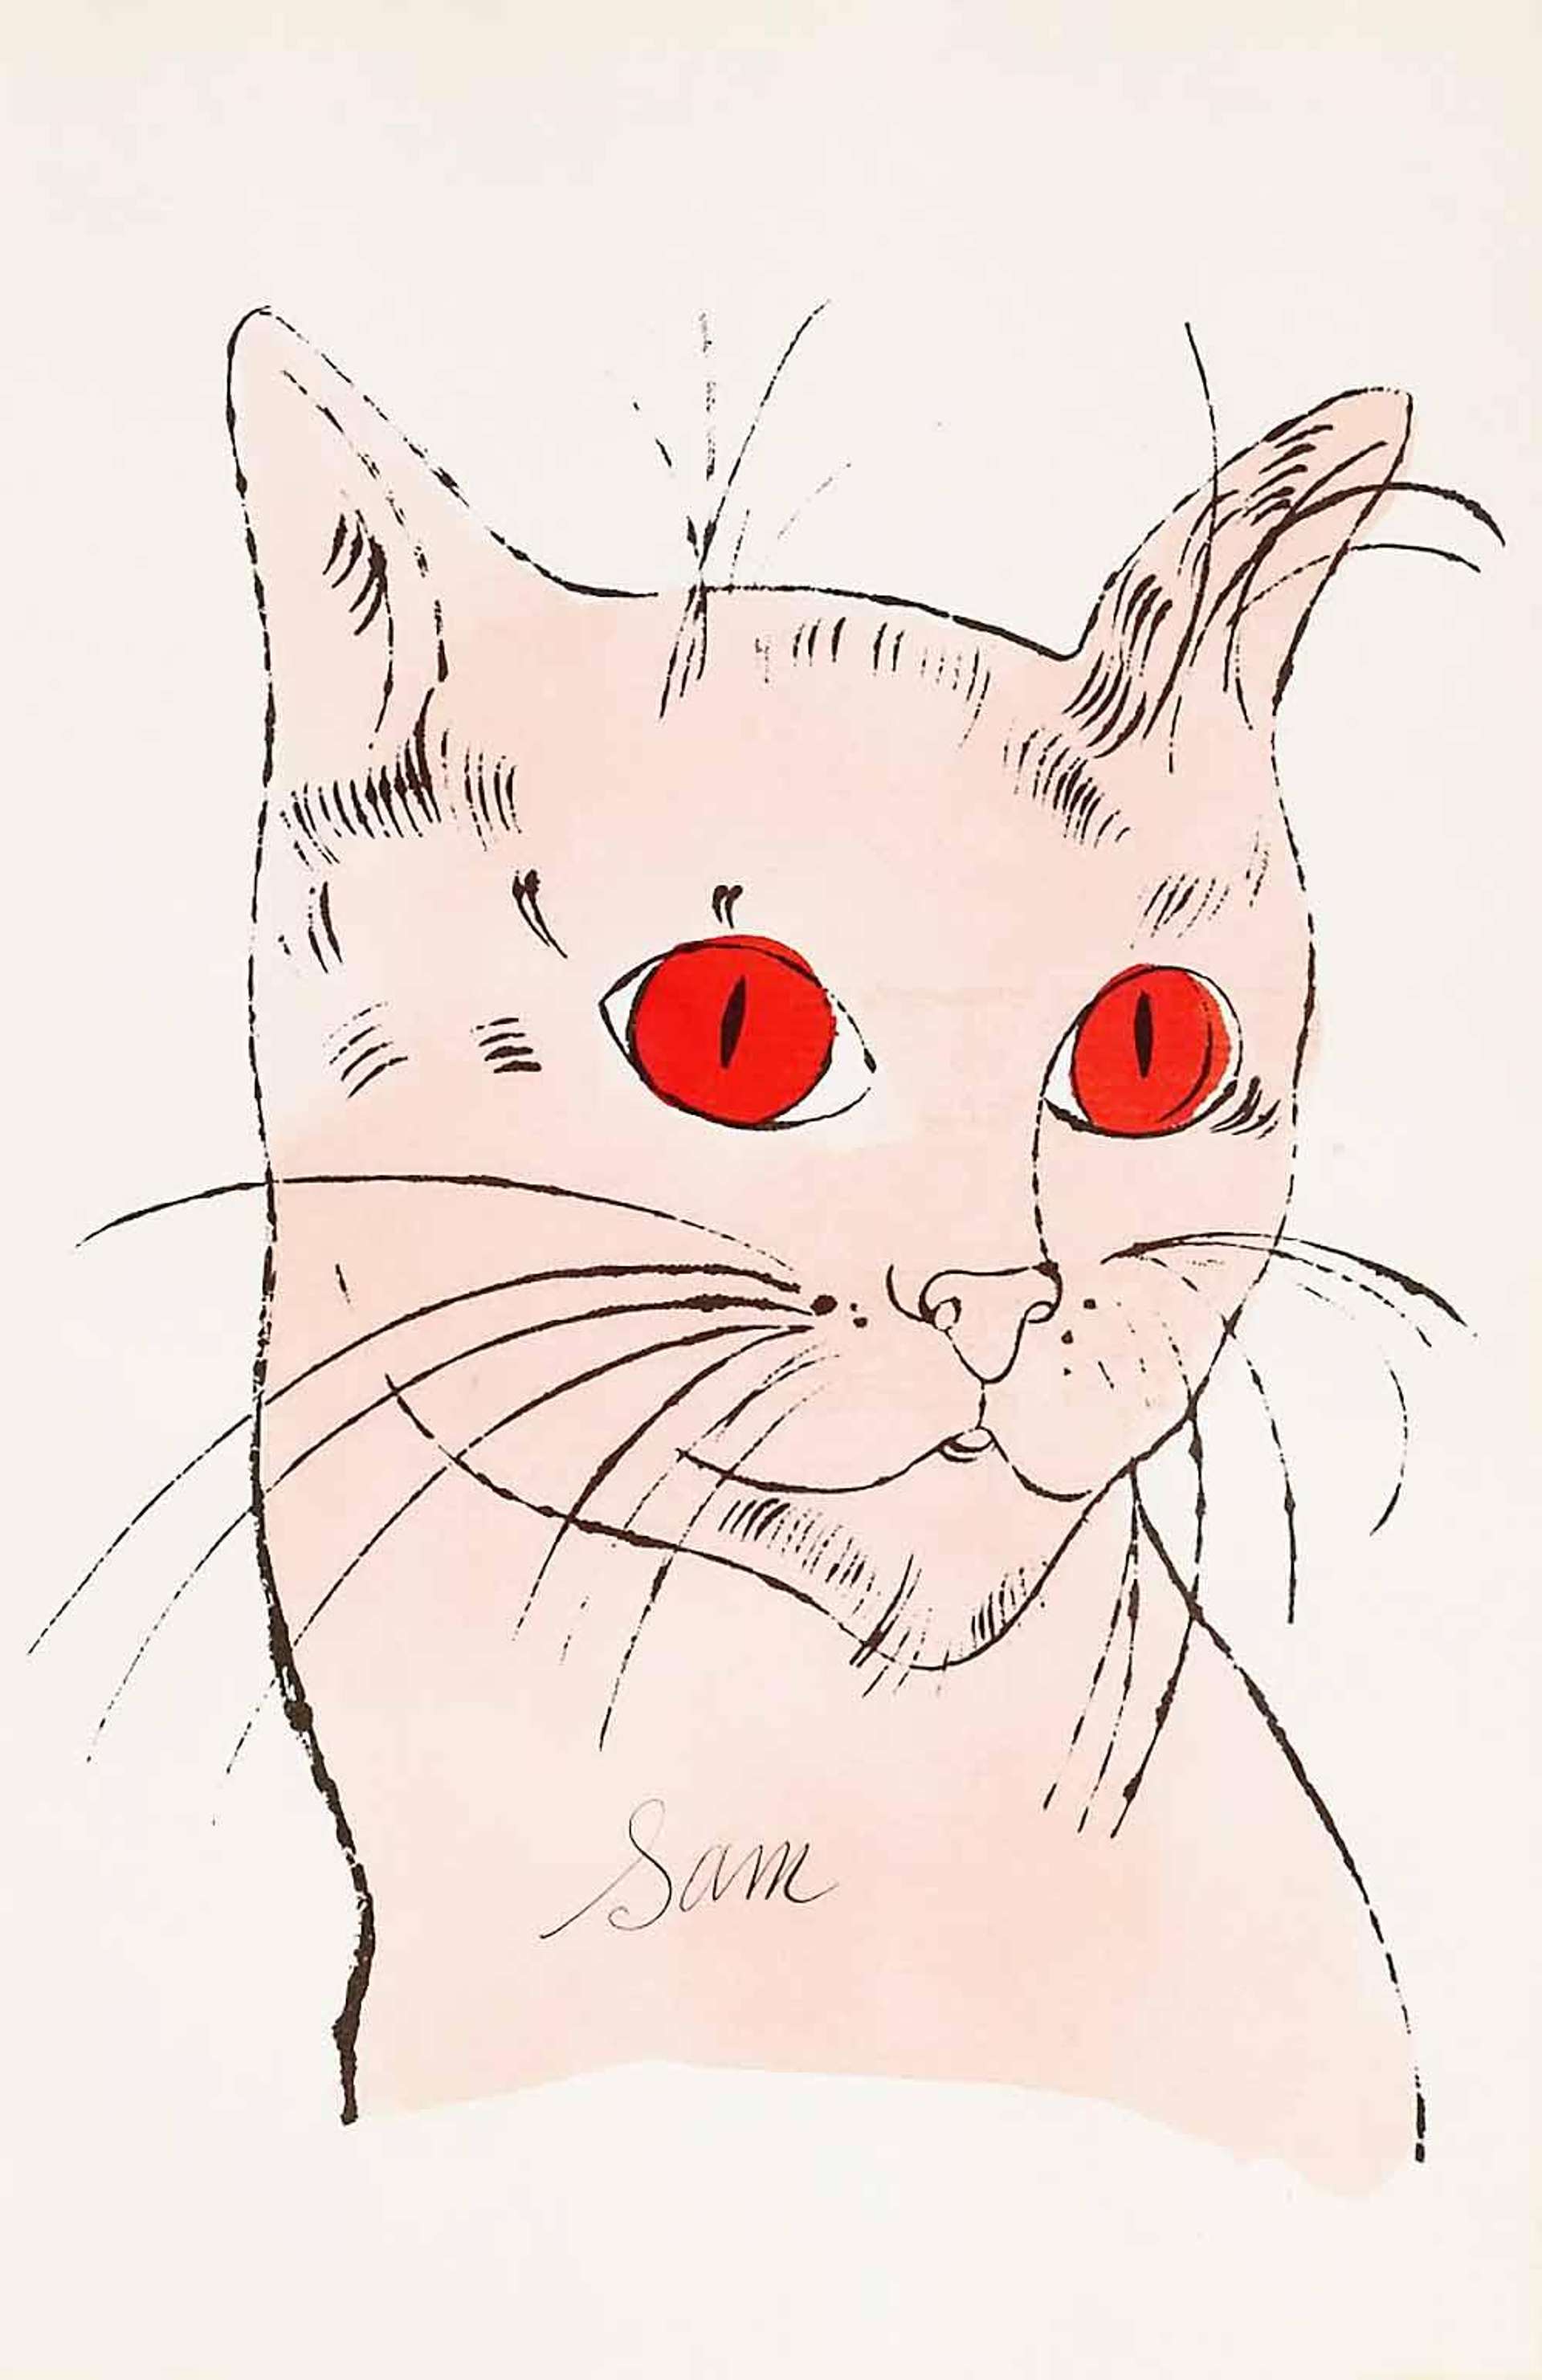 10 Facts About Andy Warhol's Cats Named Sam